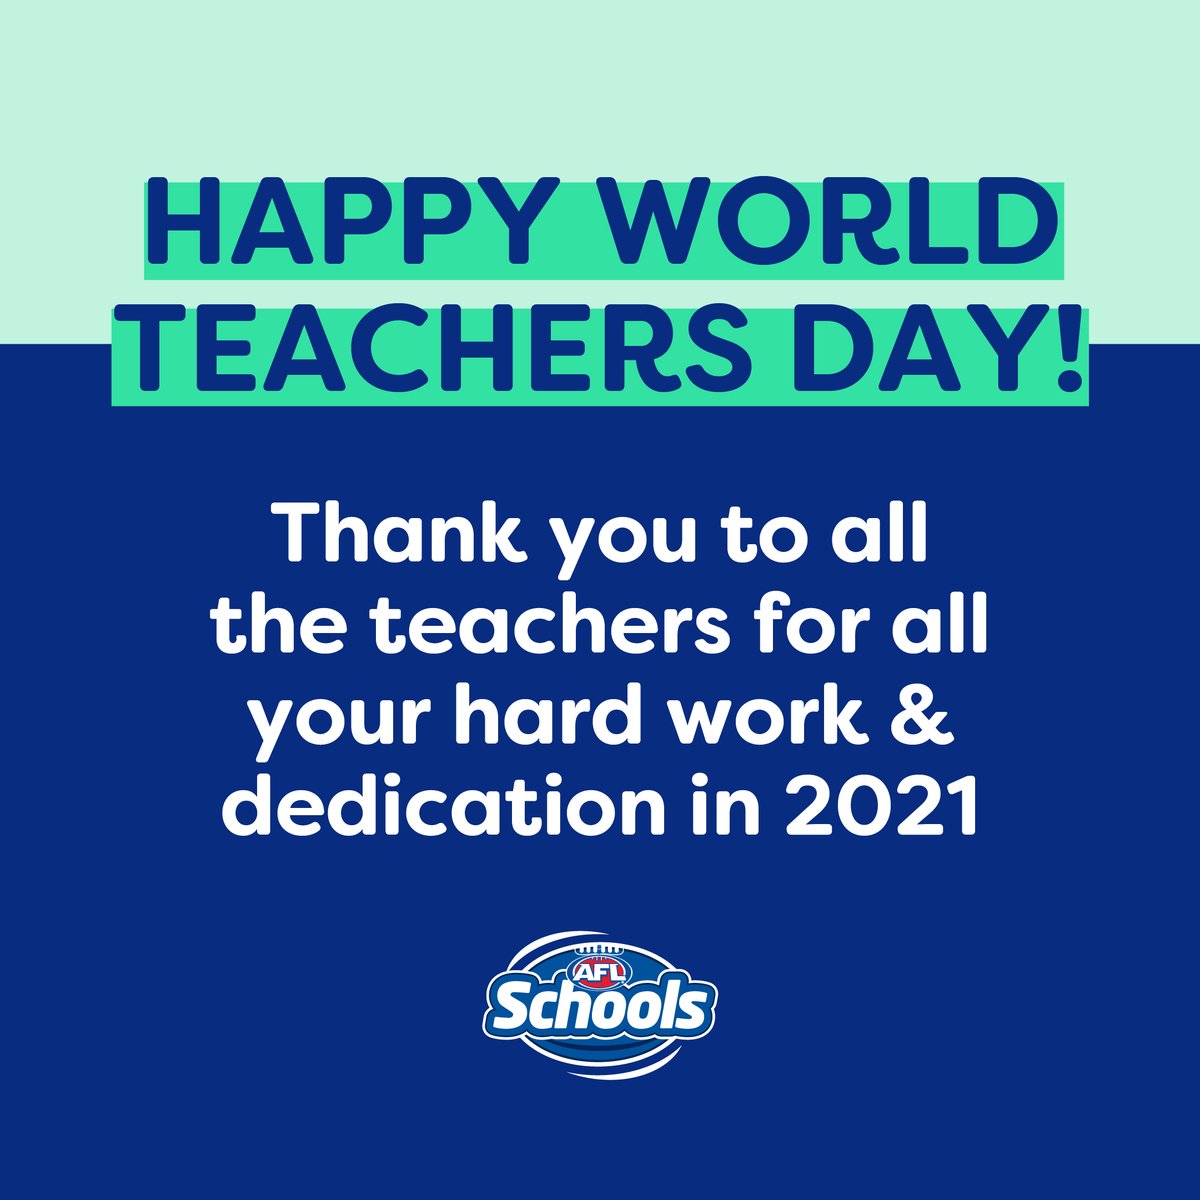 The West Australian Football Commission recognises the important role that teachers play in the lives of students, their families, and communities. To all teachers around the State, we say “Happy World Teachers Day!”